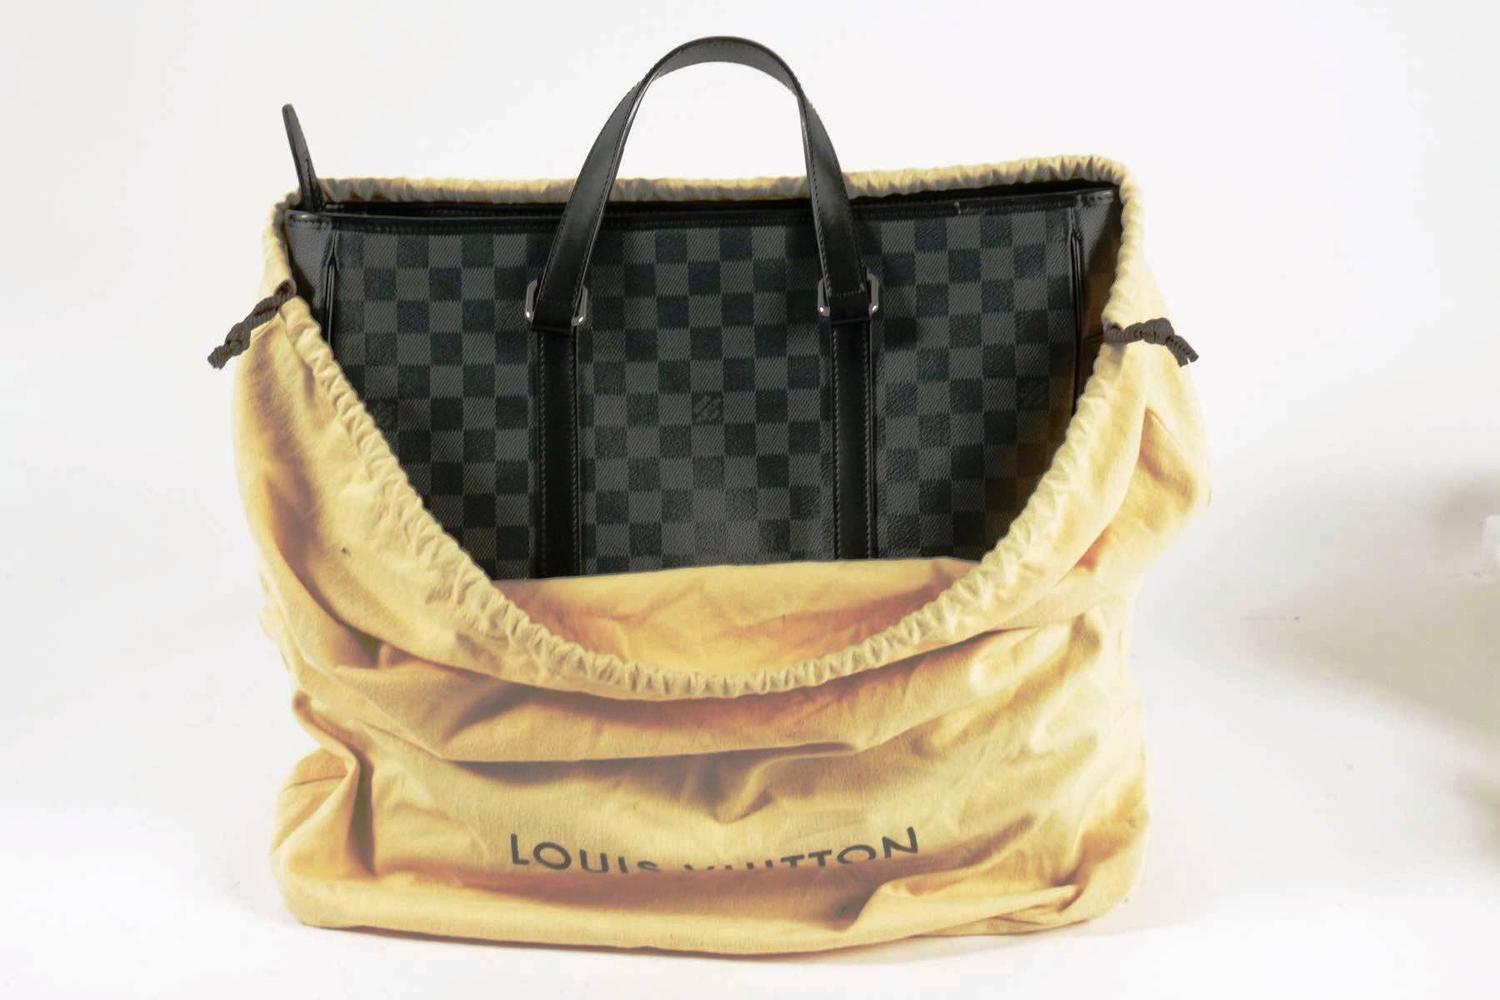 Pre-Owned Tadao Bag by Louis Vuitton, Grey and Black at 1stdibs